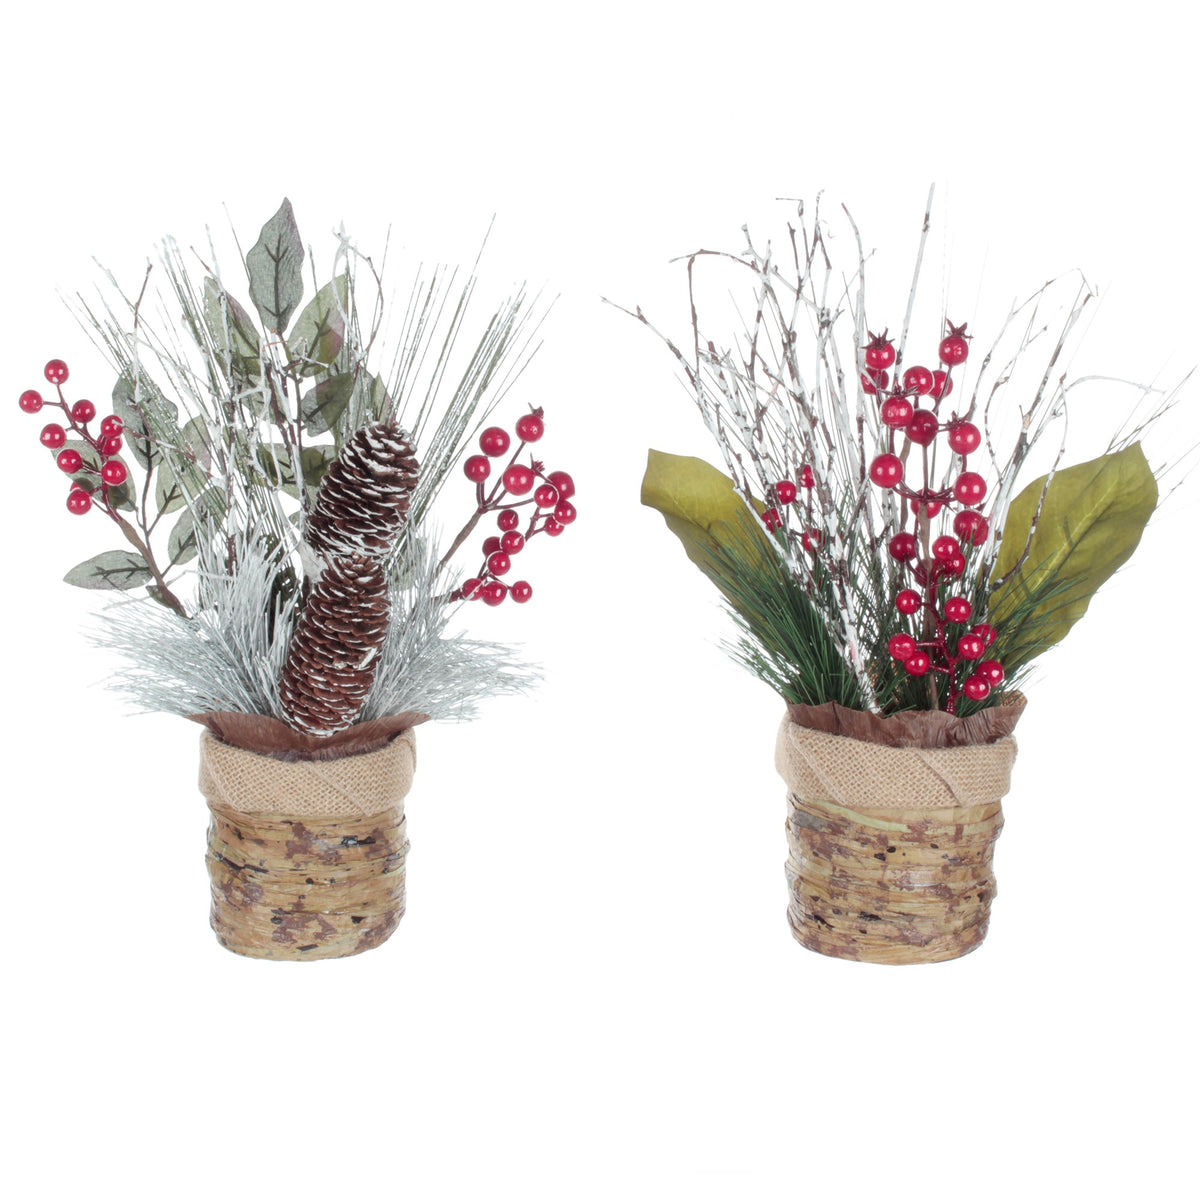 DANSON DECOR Christmas Twig and Berry Arrangement, 13 Inches, Assortment, 1 Count